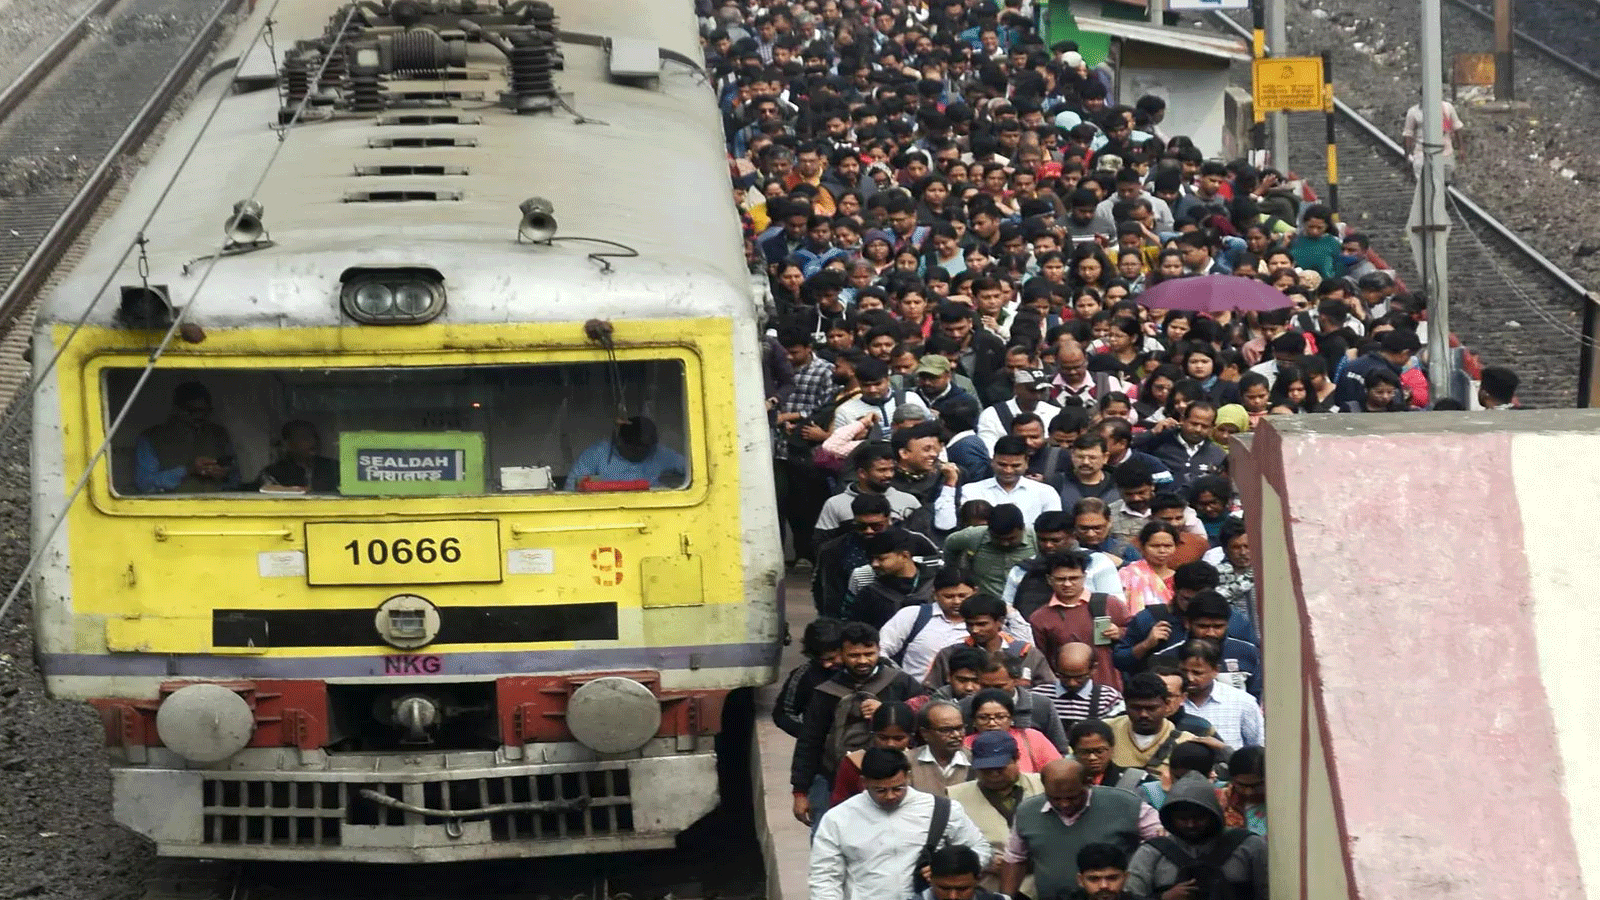 Going to work or college is like going to war in Mumbai local: Bombay HC expresses shame over 'cattle-class' situation 